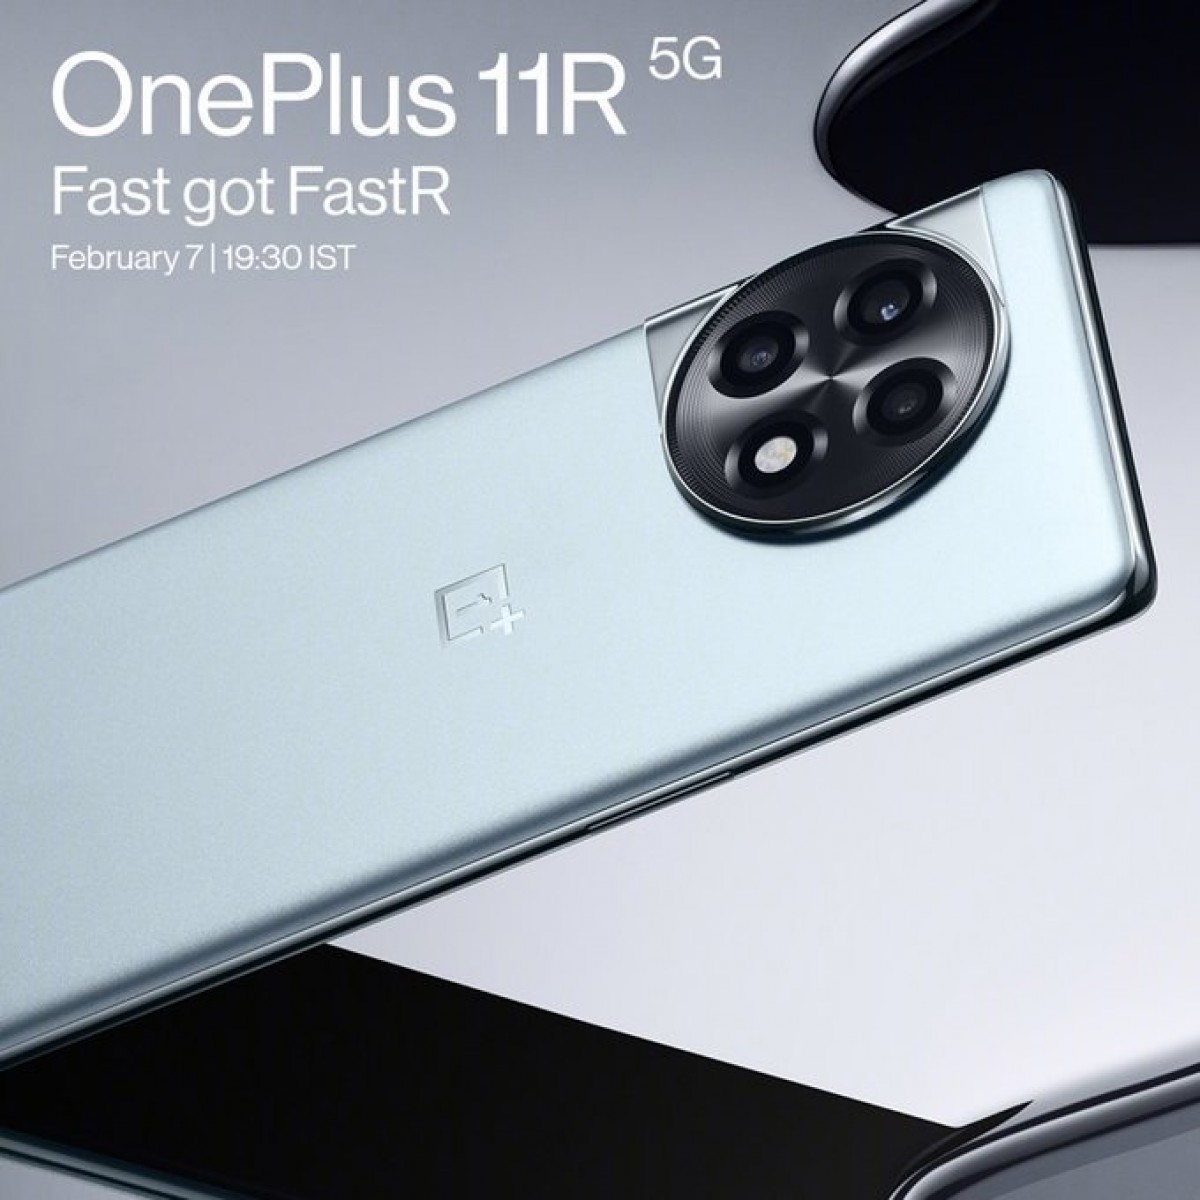 OnePlus announces OnePlus 11R with Snapdragon 8+ Gen 1 and 100W charging